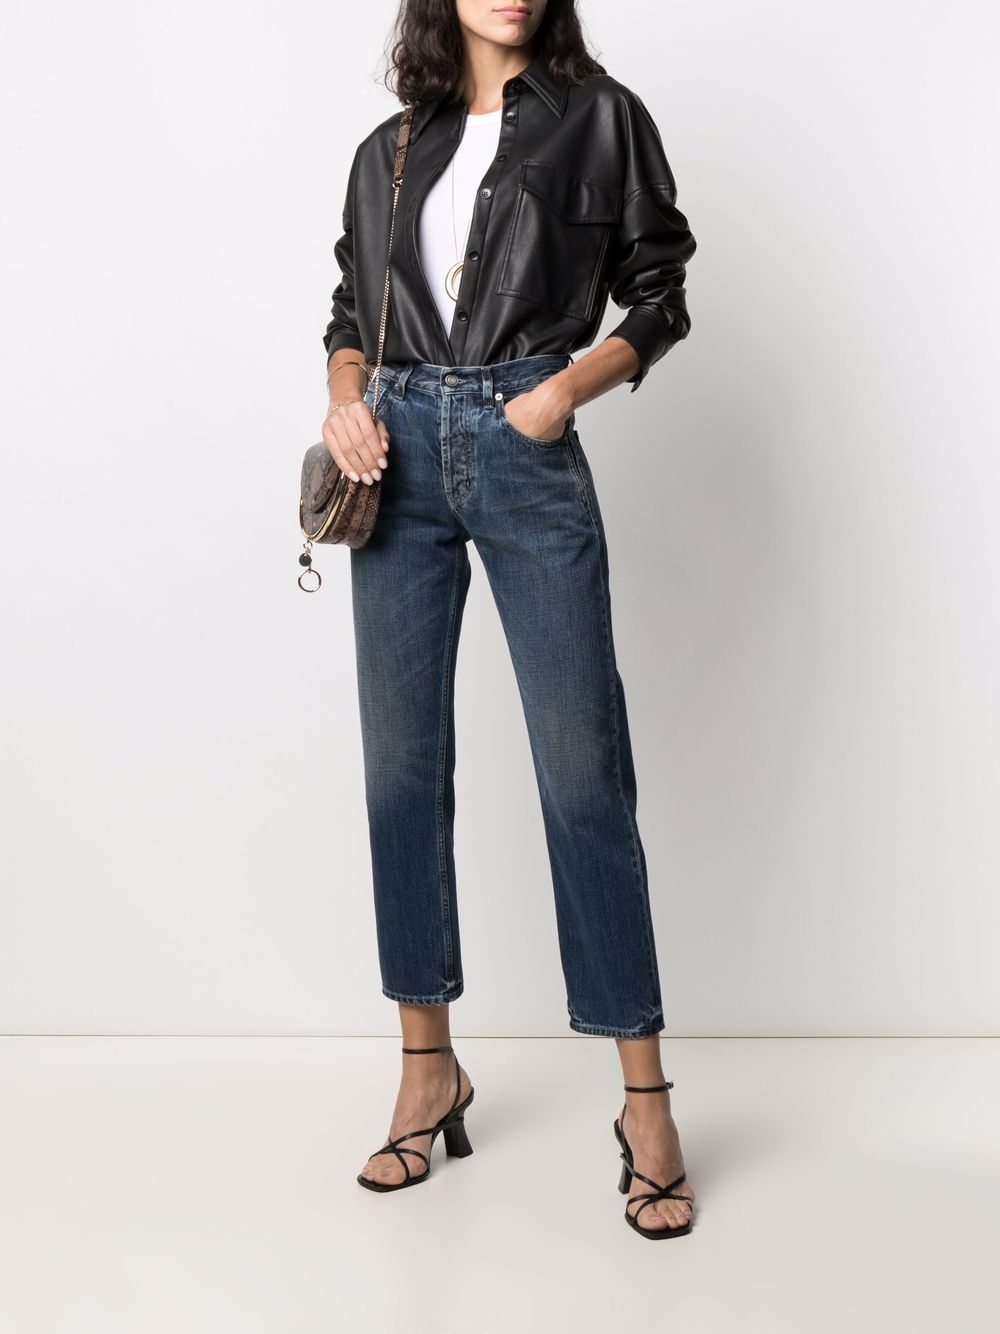 Saint Laurent high-waisted Cropped Jeans - Farfetch